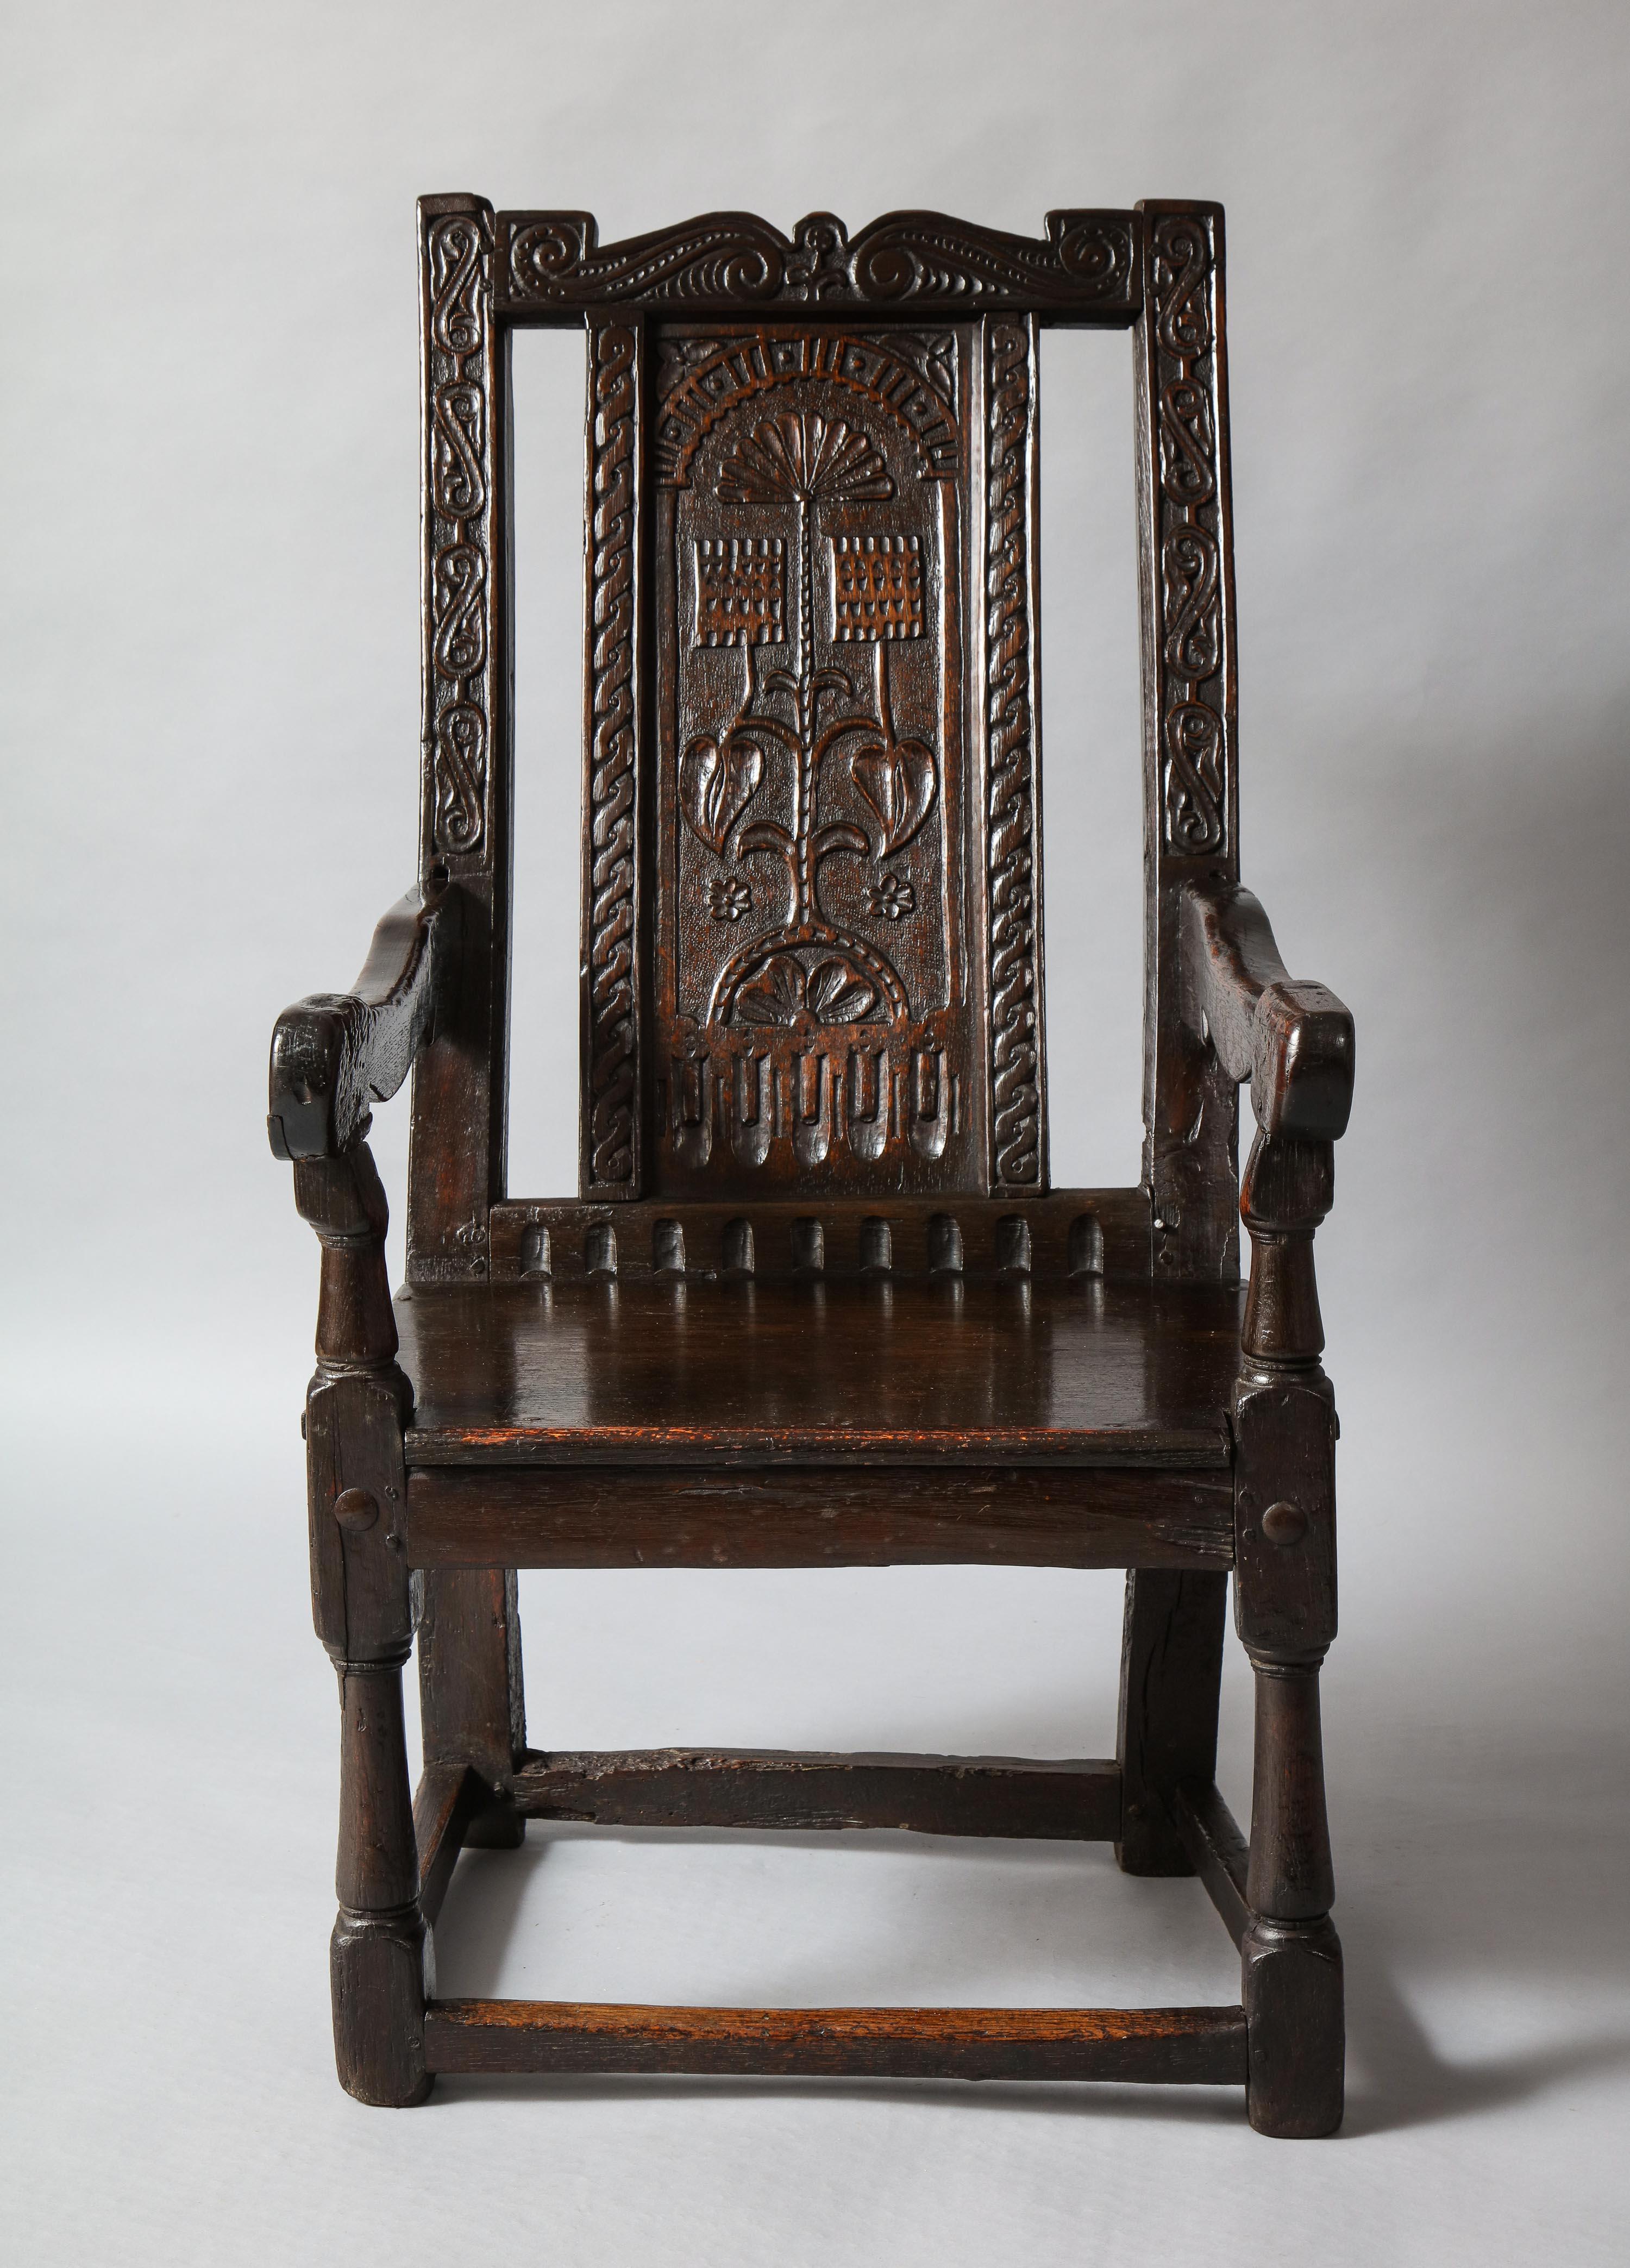 Most unusual 17th century English or welsh wainscot chair having a shaped and scroll carved crest over similarly carved rails, the central panel with fan shell and square foliate design, having shaped arms and turned supports and legs, the whole